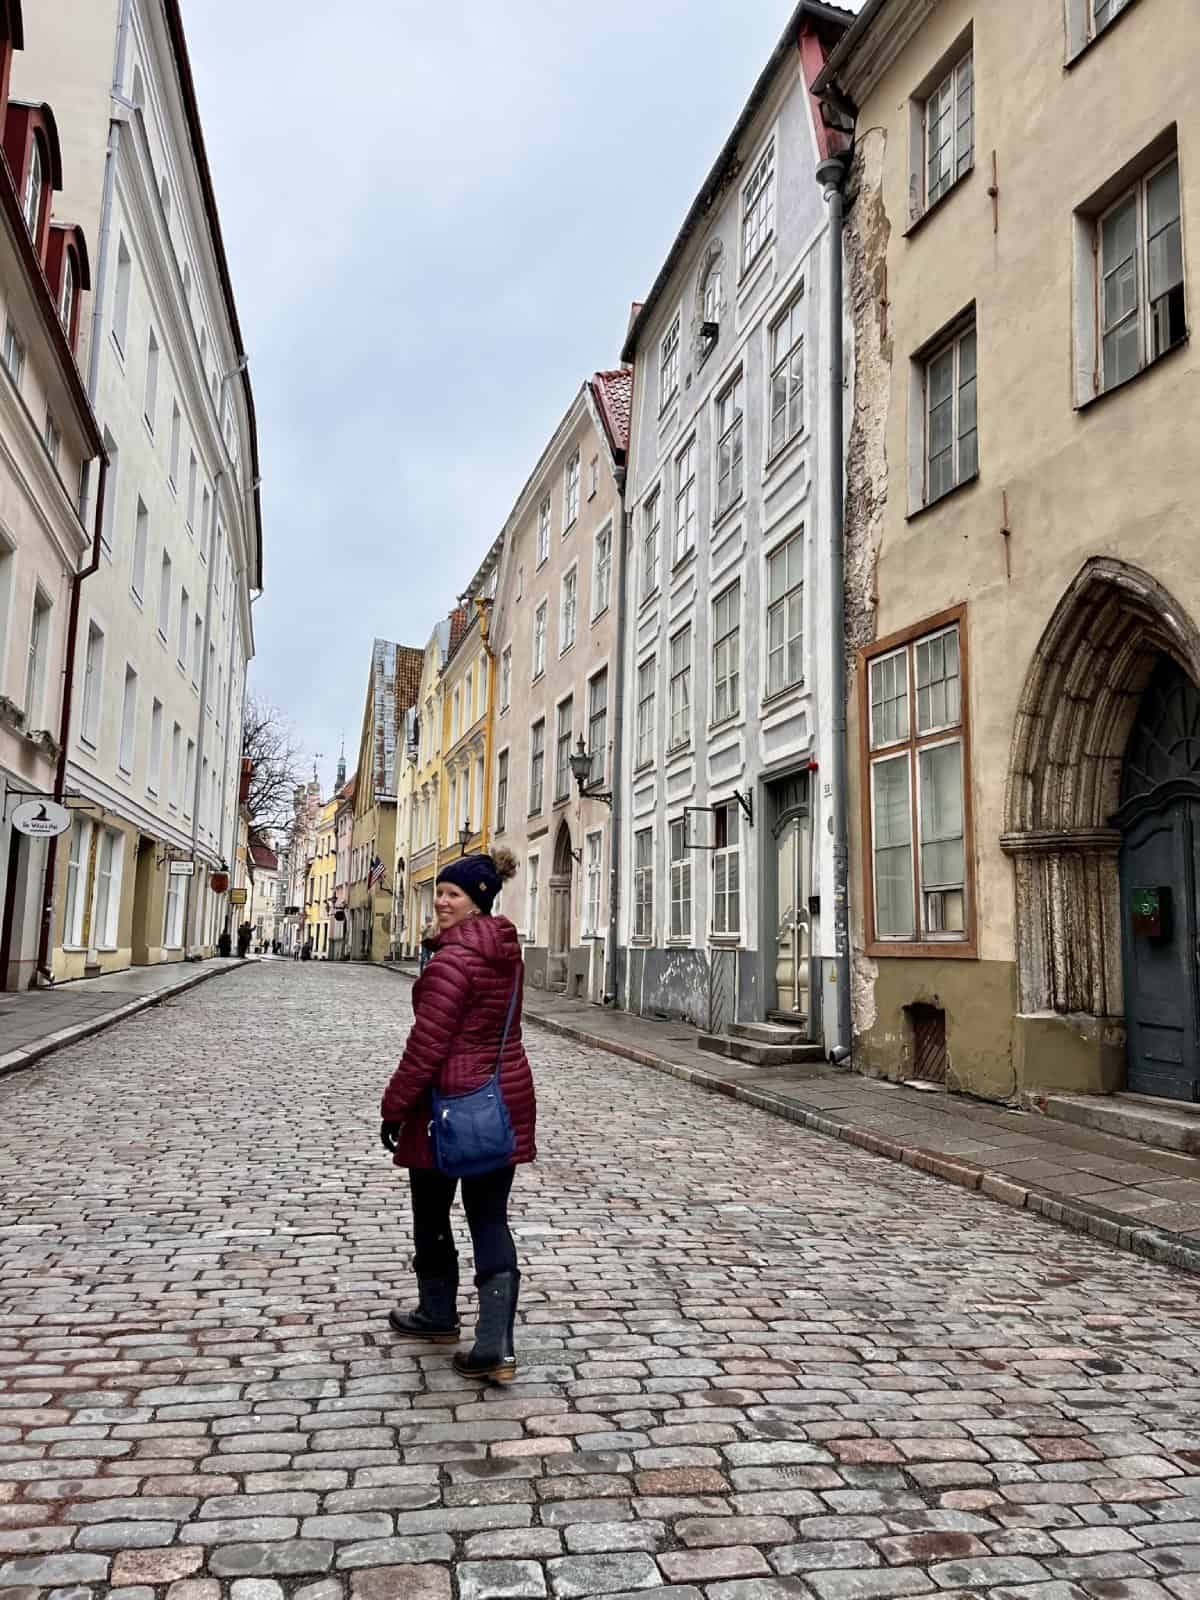 A Day in Tallinn, Estonia | What to do in Tallinn, one of Europe's best-preserved medieval city centers & a great day trip from Helsinki! 